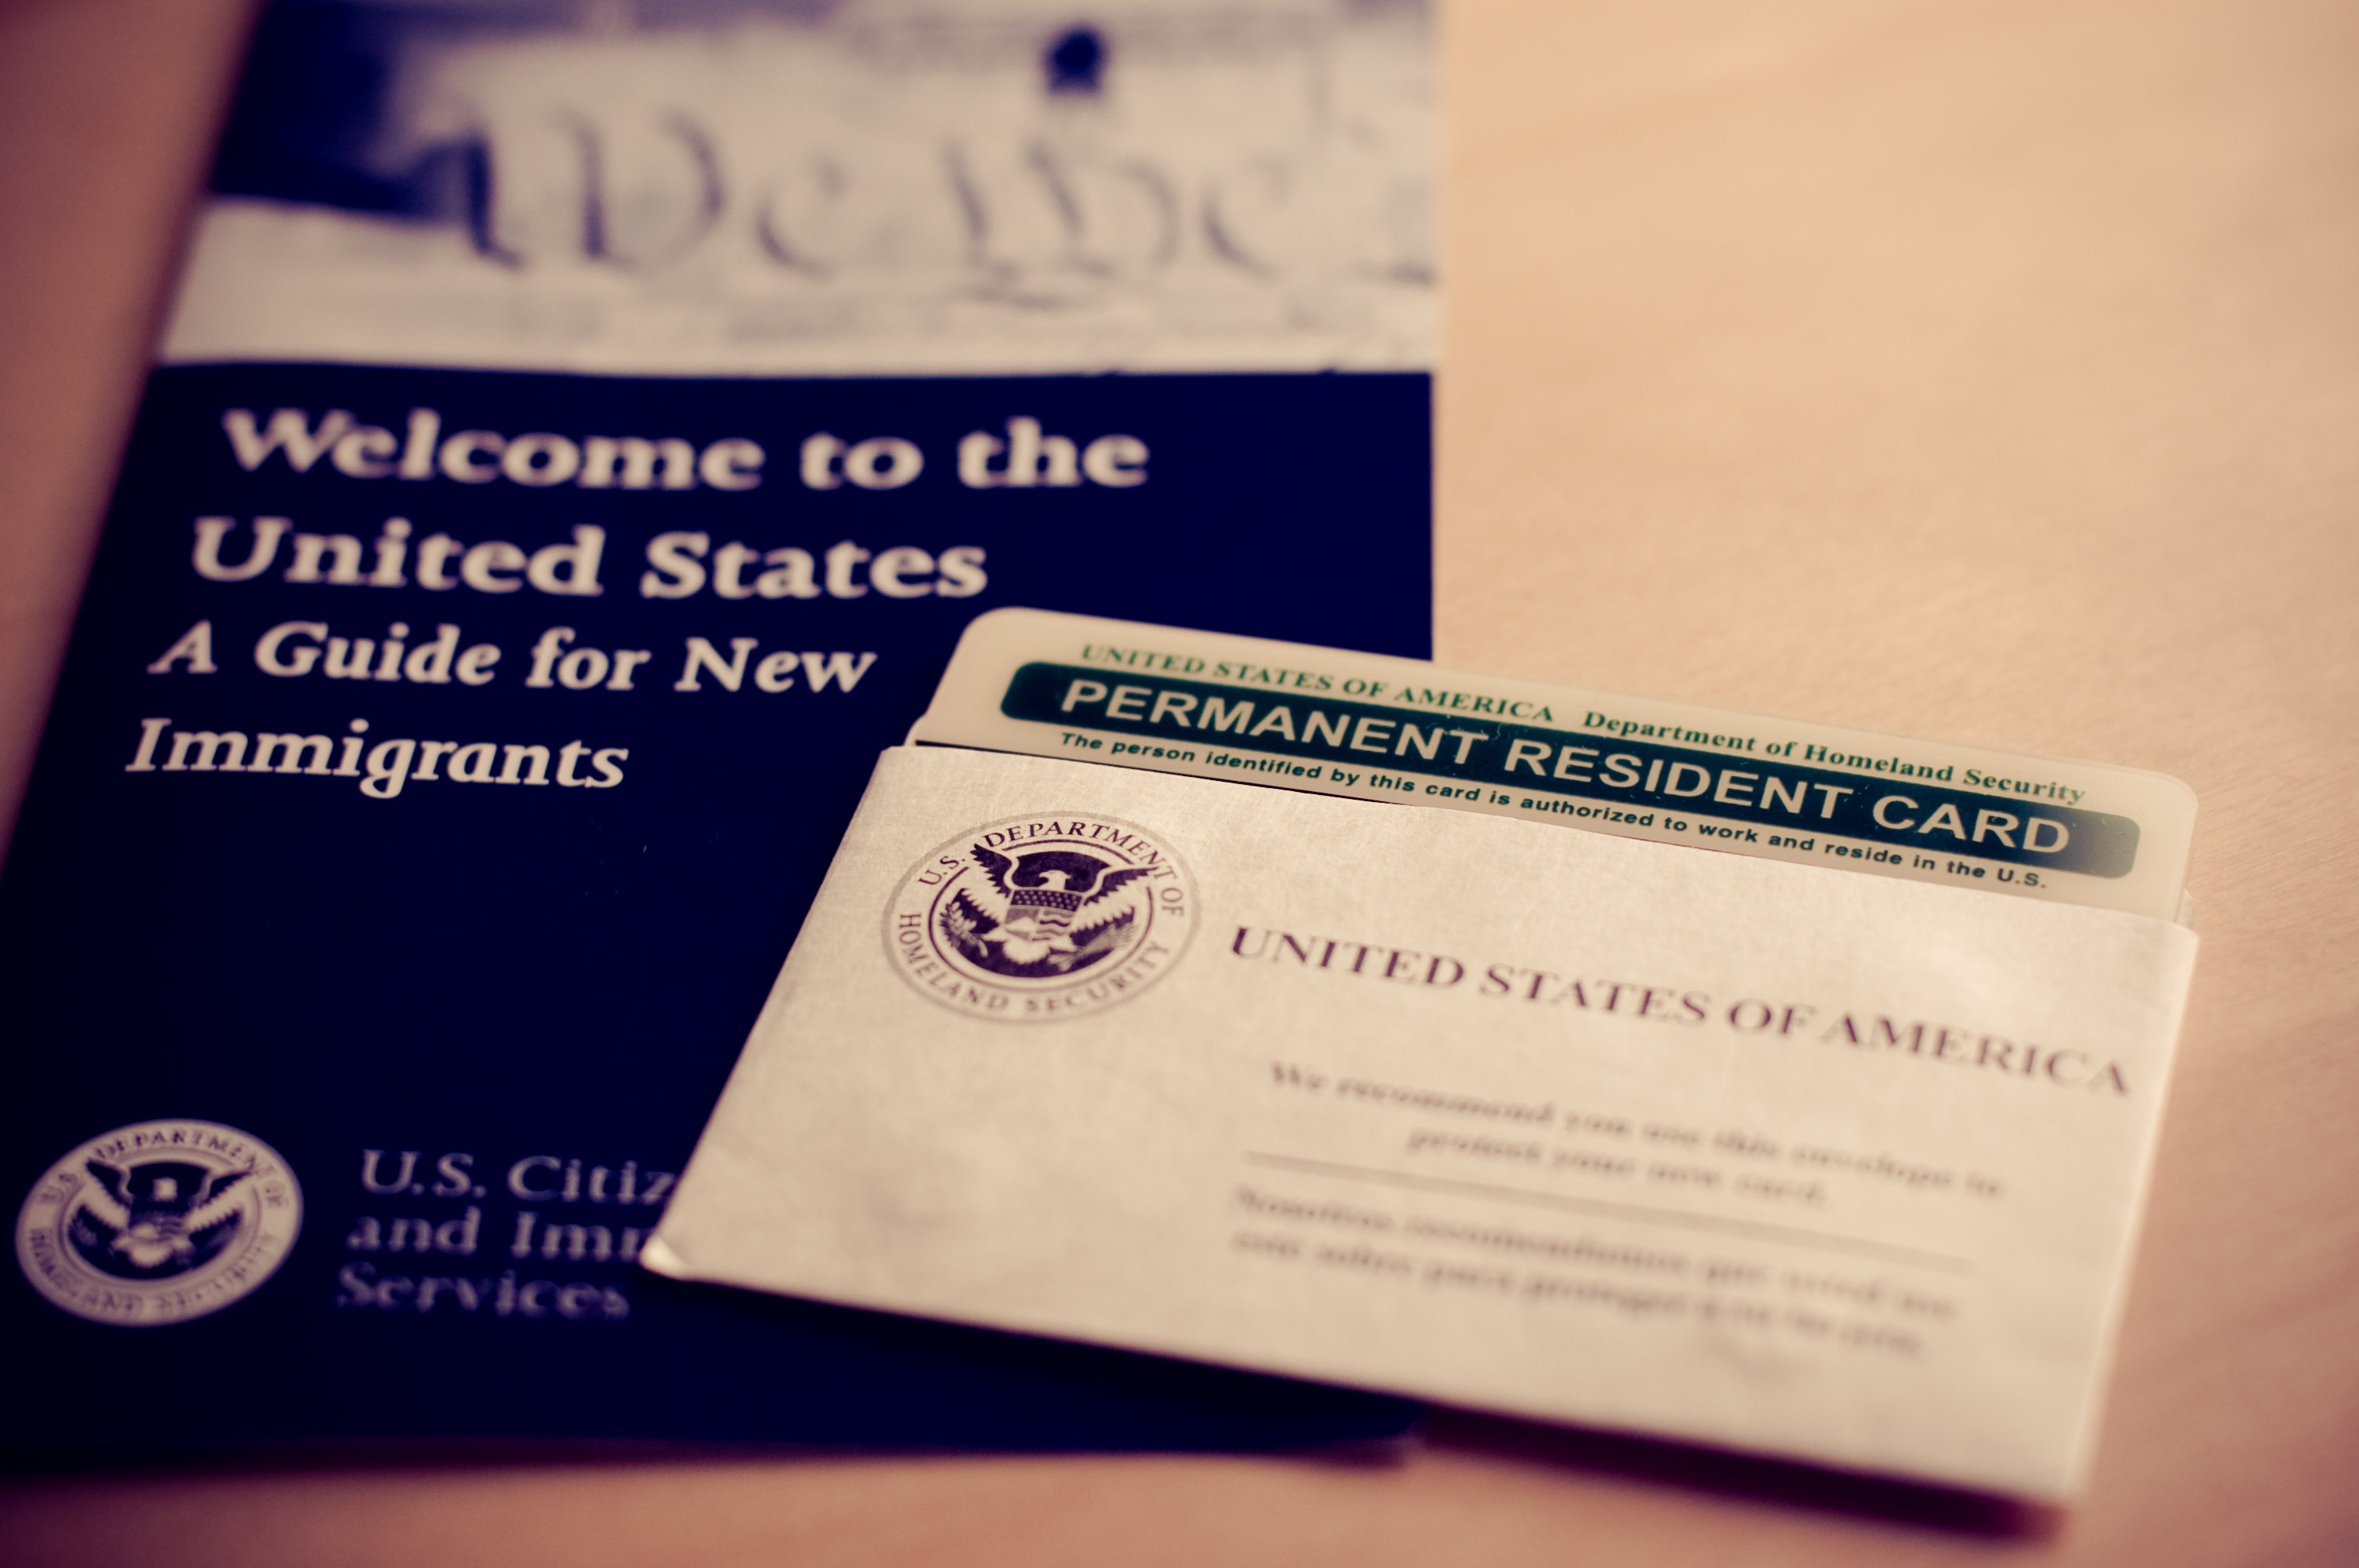 How to Get a Green Card in USA? Here Are the Top 5 Ways